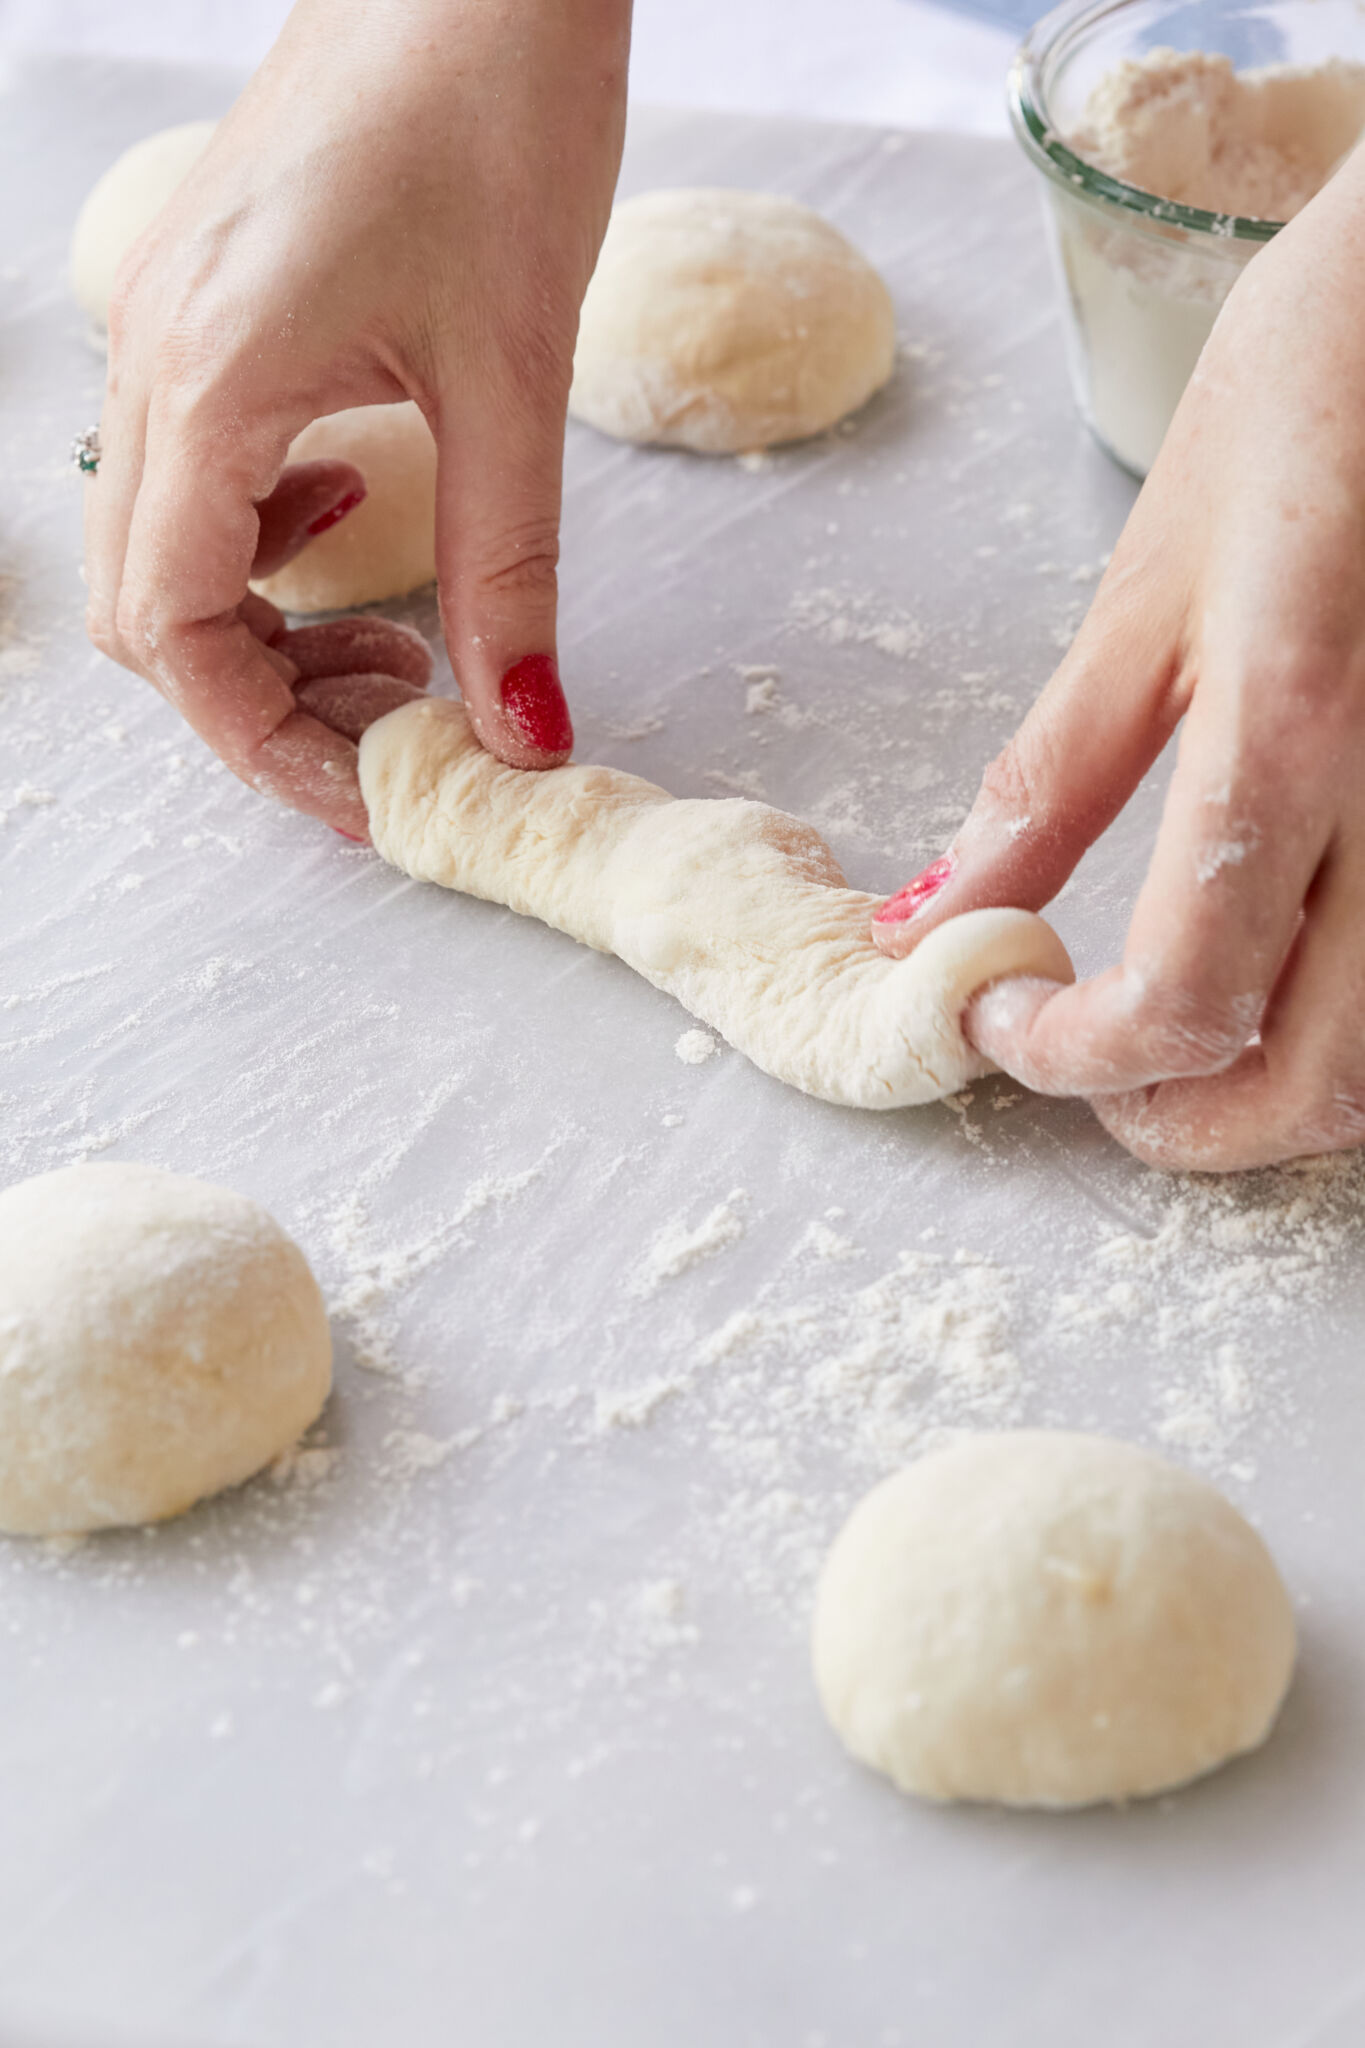 Step-by-step instructions on how to make Garlic Breadsticks: Roll individual balls into logs on a slightly floured surface, preparing for baking. 